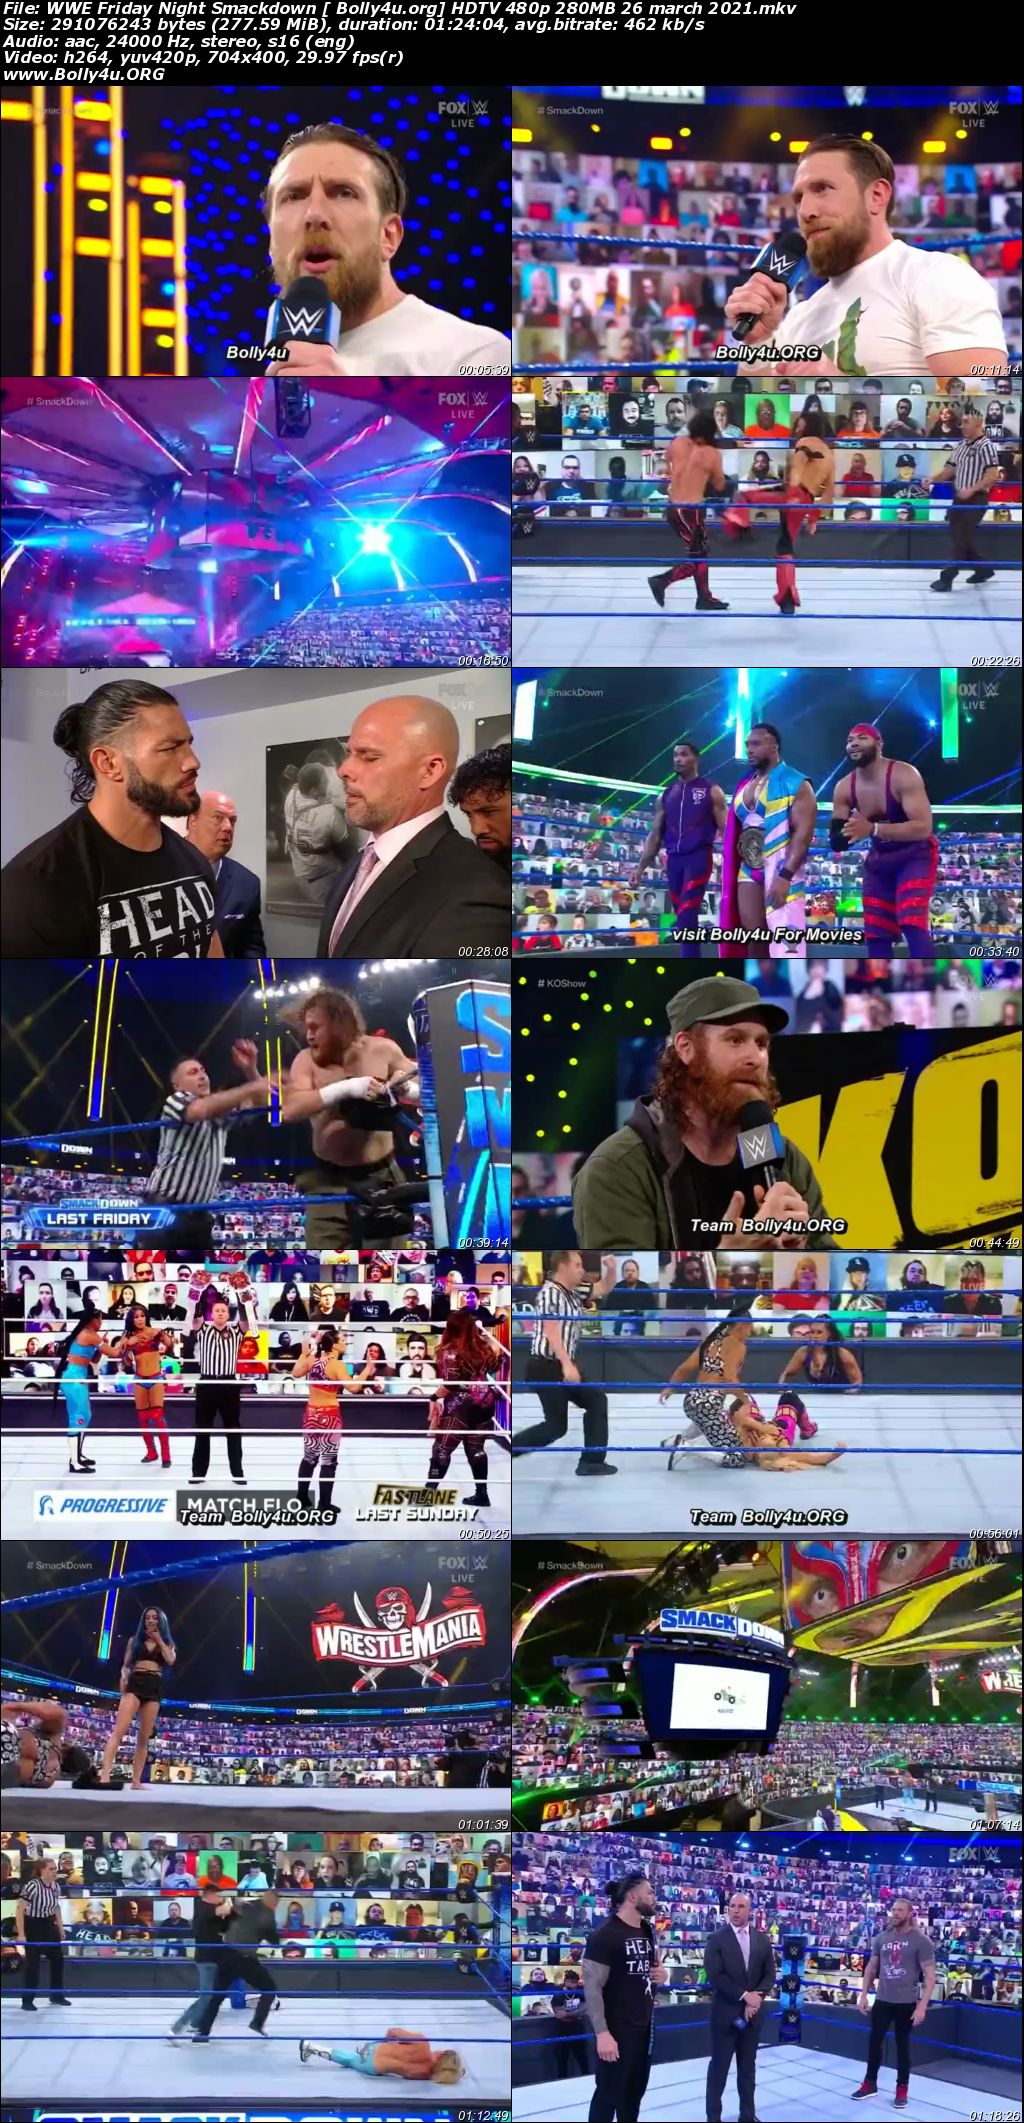 WWE Friday Night Smackdown HDTV 480p 280MB 26 March 2021 Download